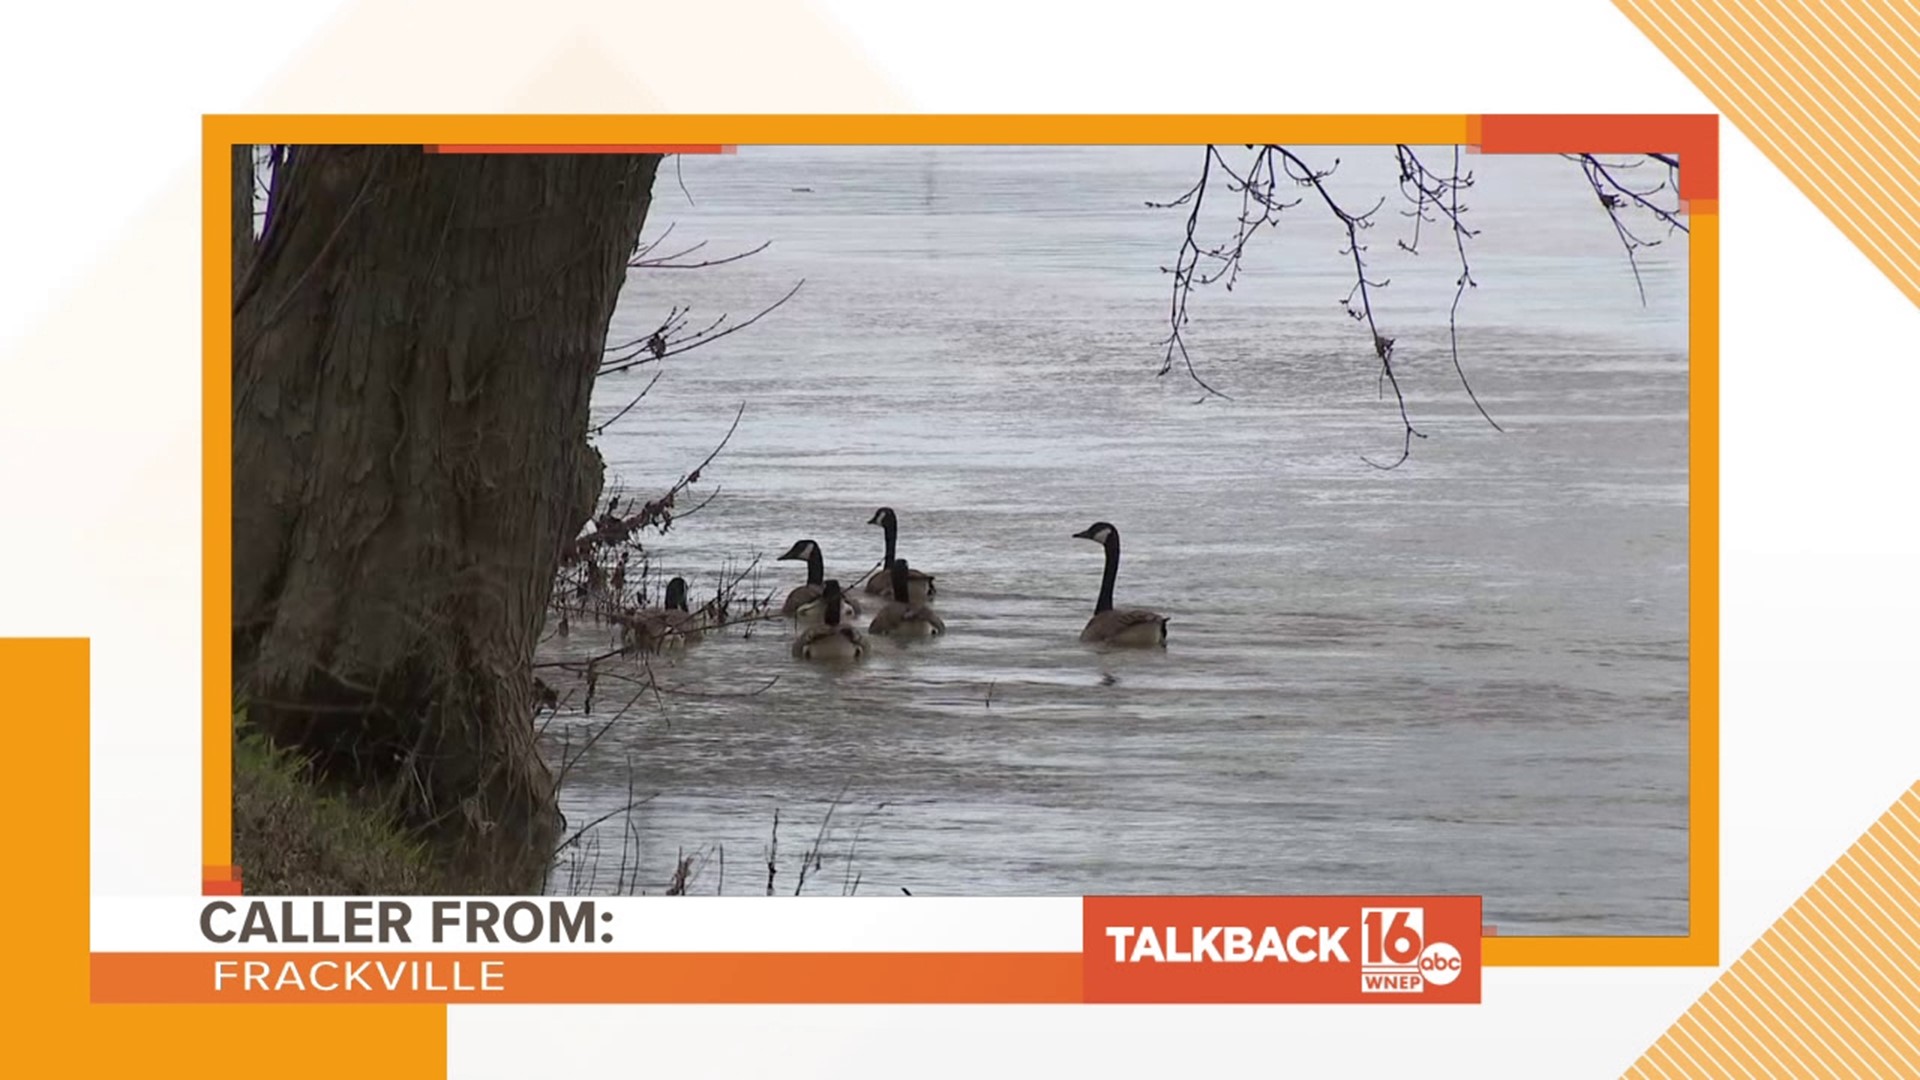 Callers are concerned for more than just the Bloomsburg geese in this edition of Talkback 16.